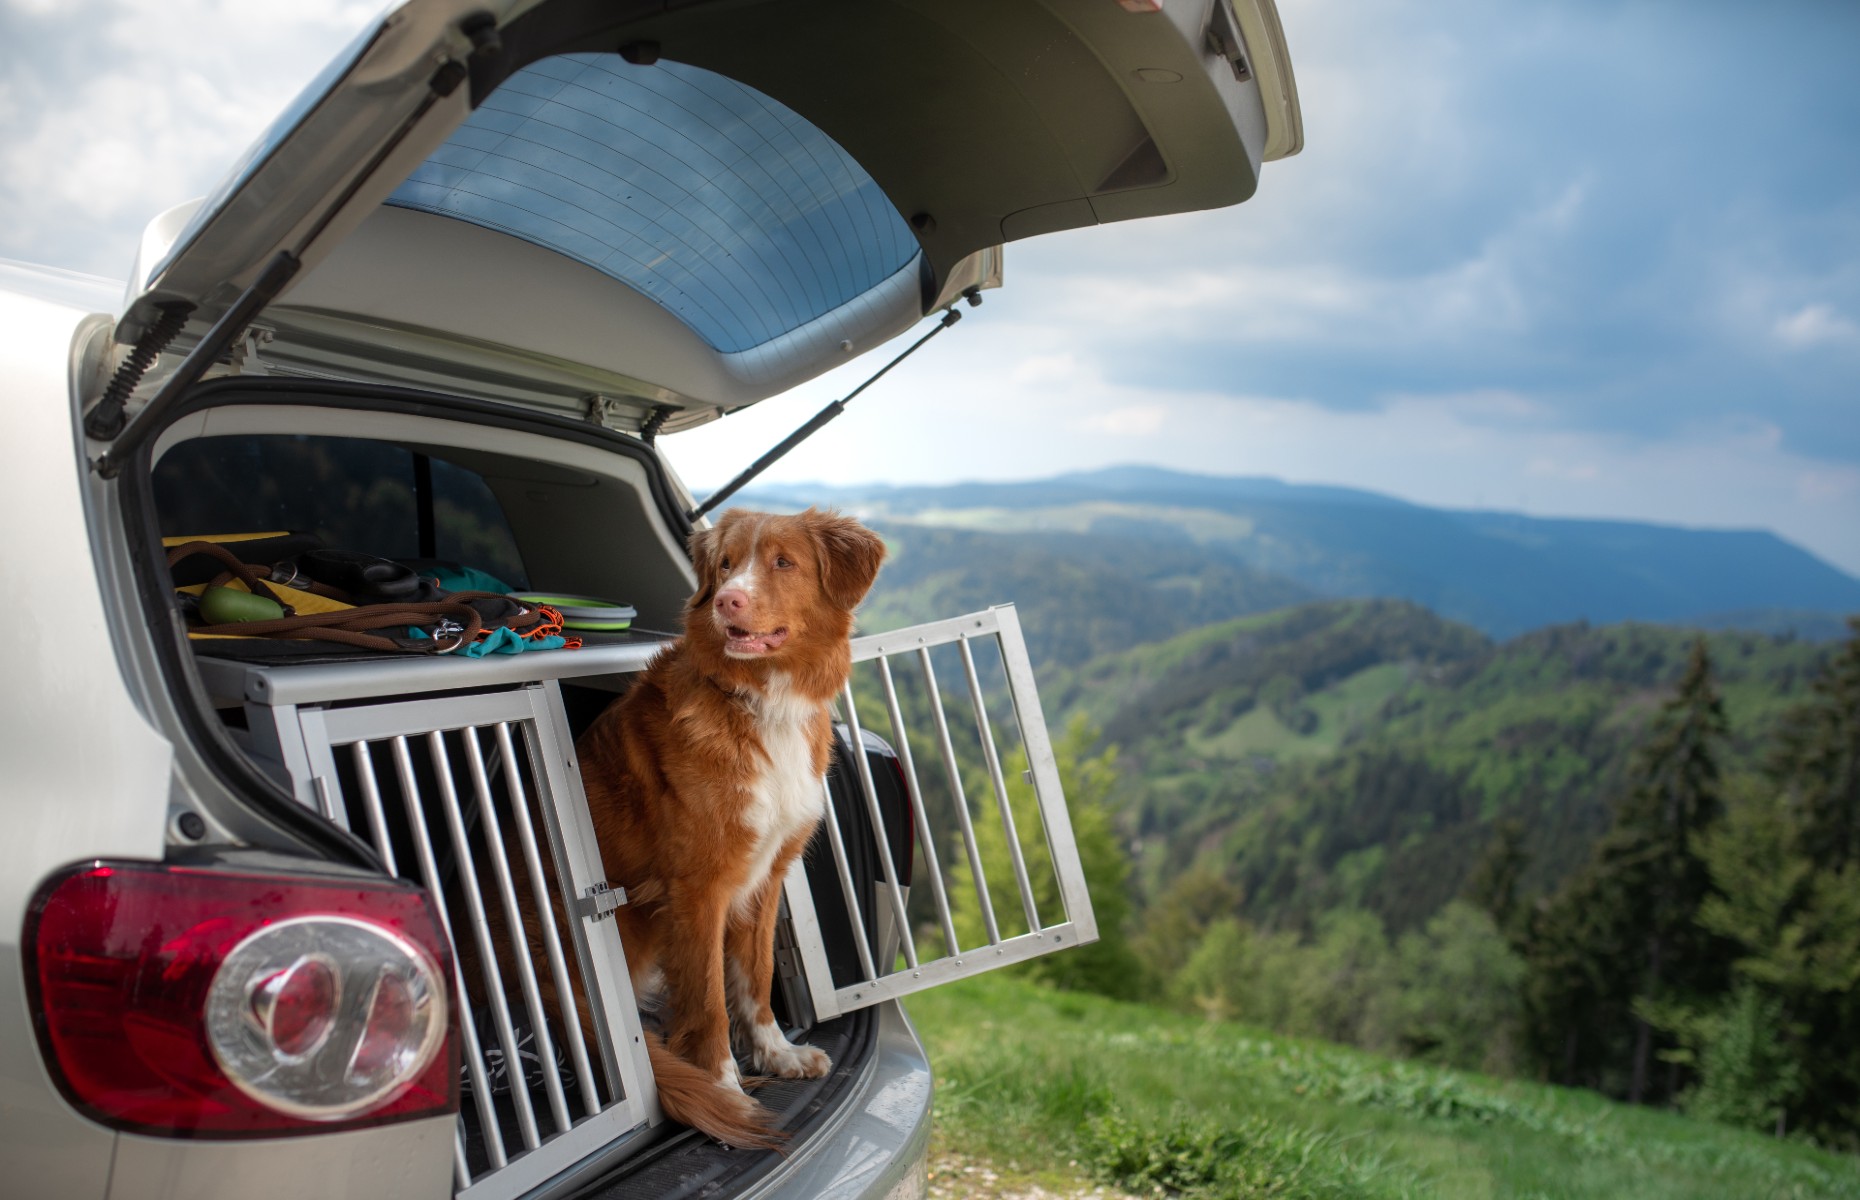 Dog in its crate in the boot of a car (Image:  dezy/Shutterstock)